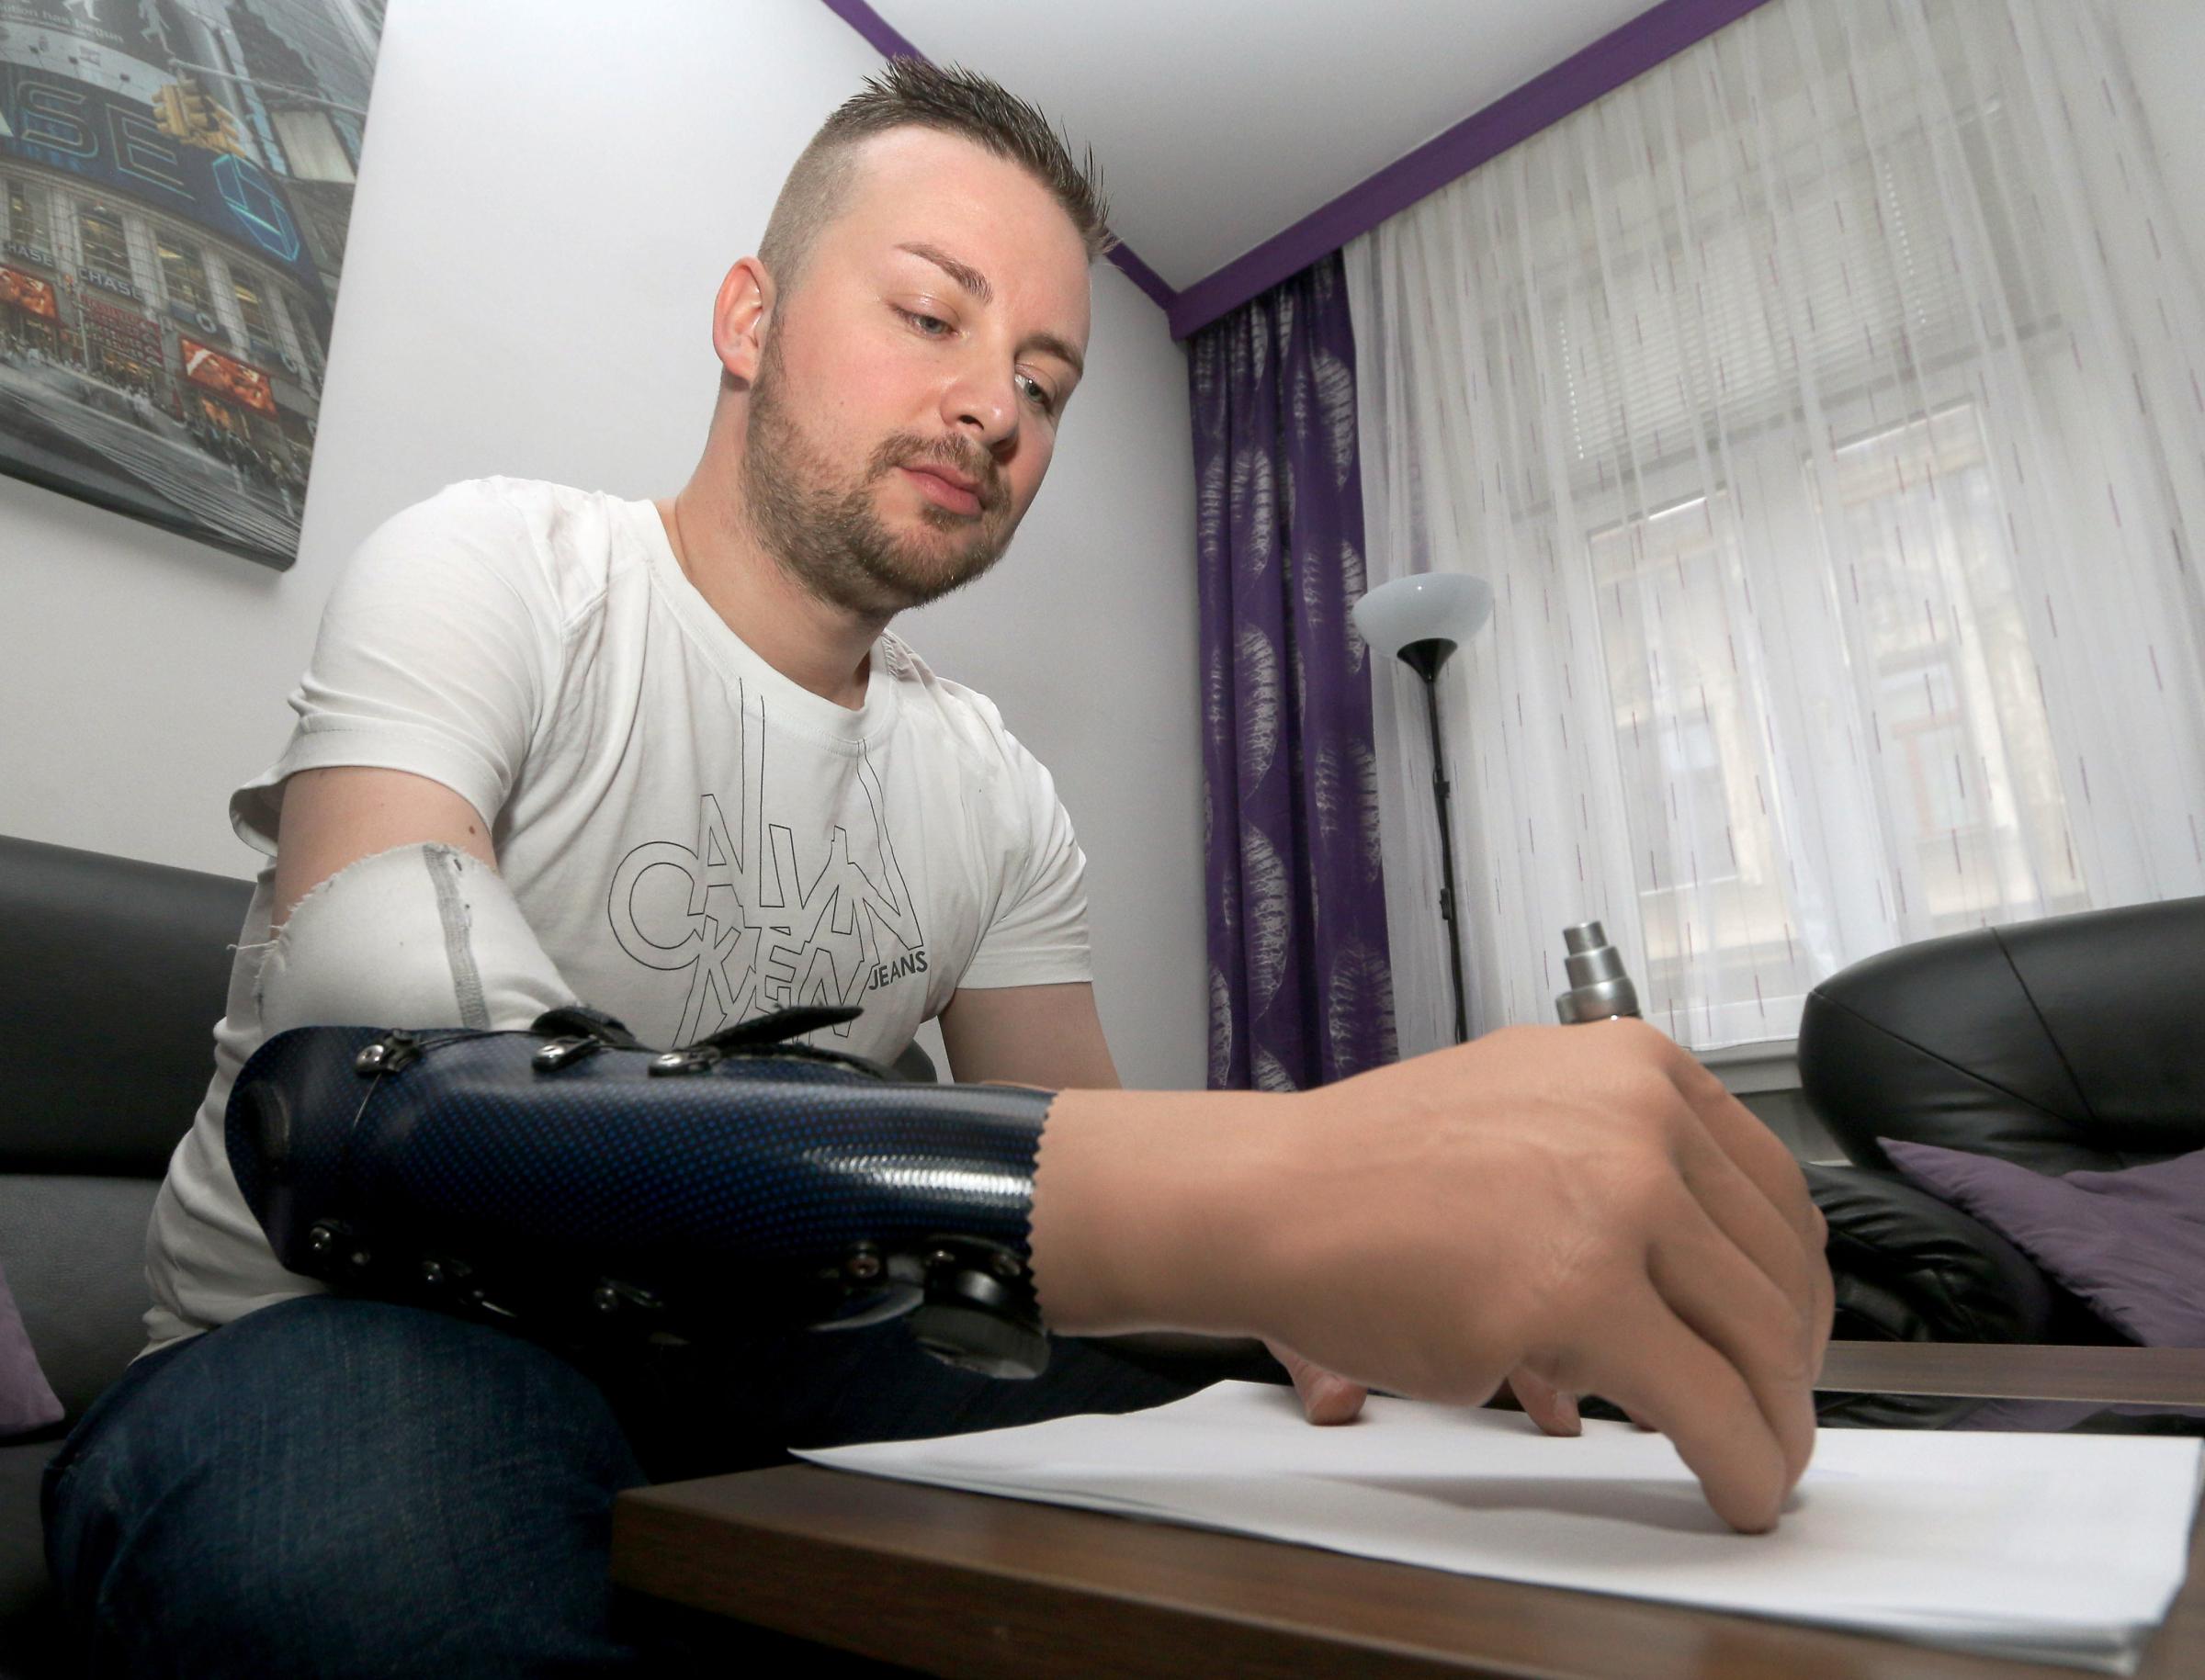 Milorad Marinkovic demonstrates writing with his bionic hand as he poses for a photograph at his home in Vienna, Austria, Tuesday, Feb. 24, 2015. Three Austrians have replaced injured hands with bionic ones that they can control using nerves and muscles transplanted into their arms from their legs. The three men are the first to undergo what doctors refer to as bionic reconstruction, which includes voluntary amputation, transplantation of nerves and muscles and learning to use faint signals from them to command the hand. (AP Photo/Ronald Zak)